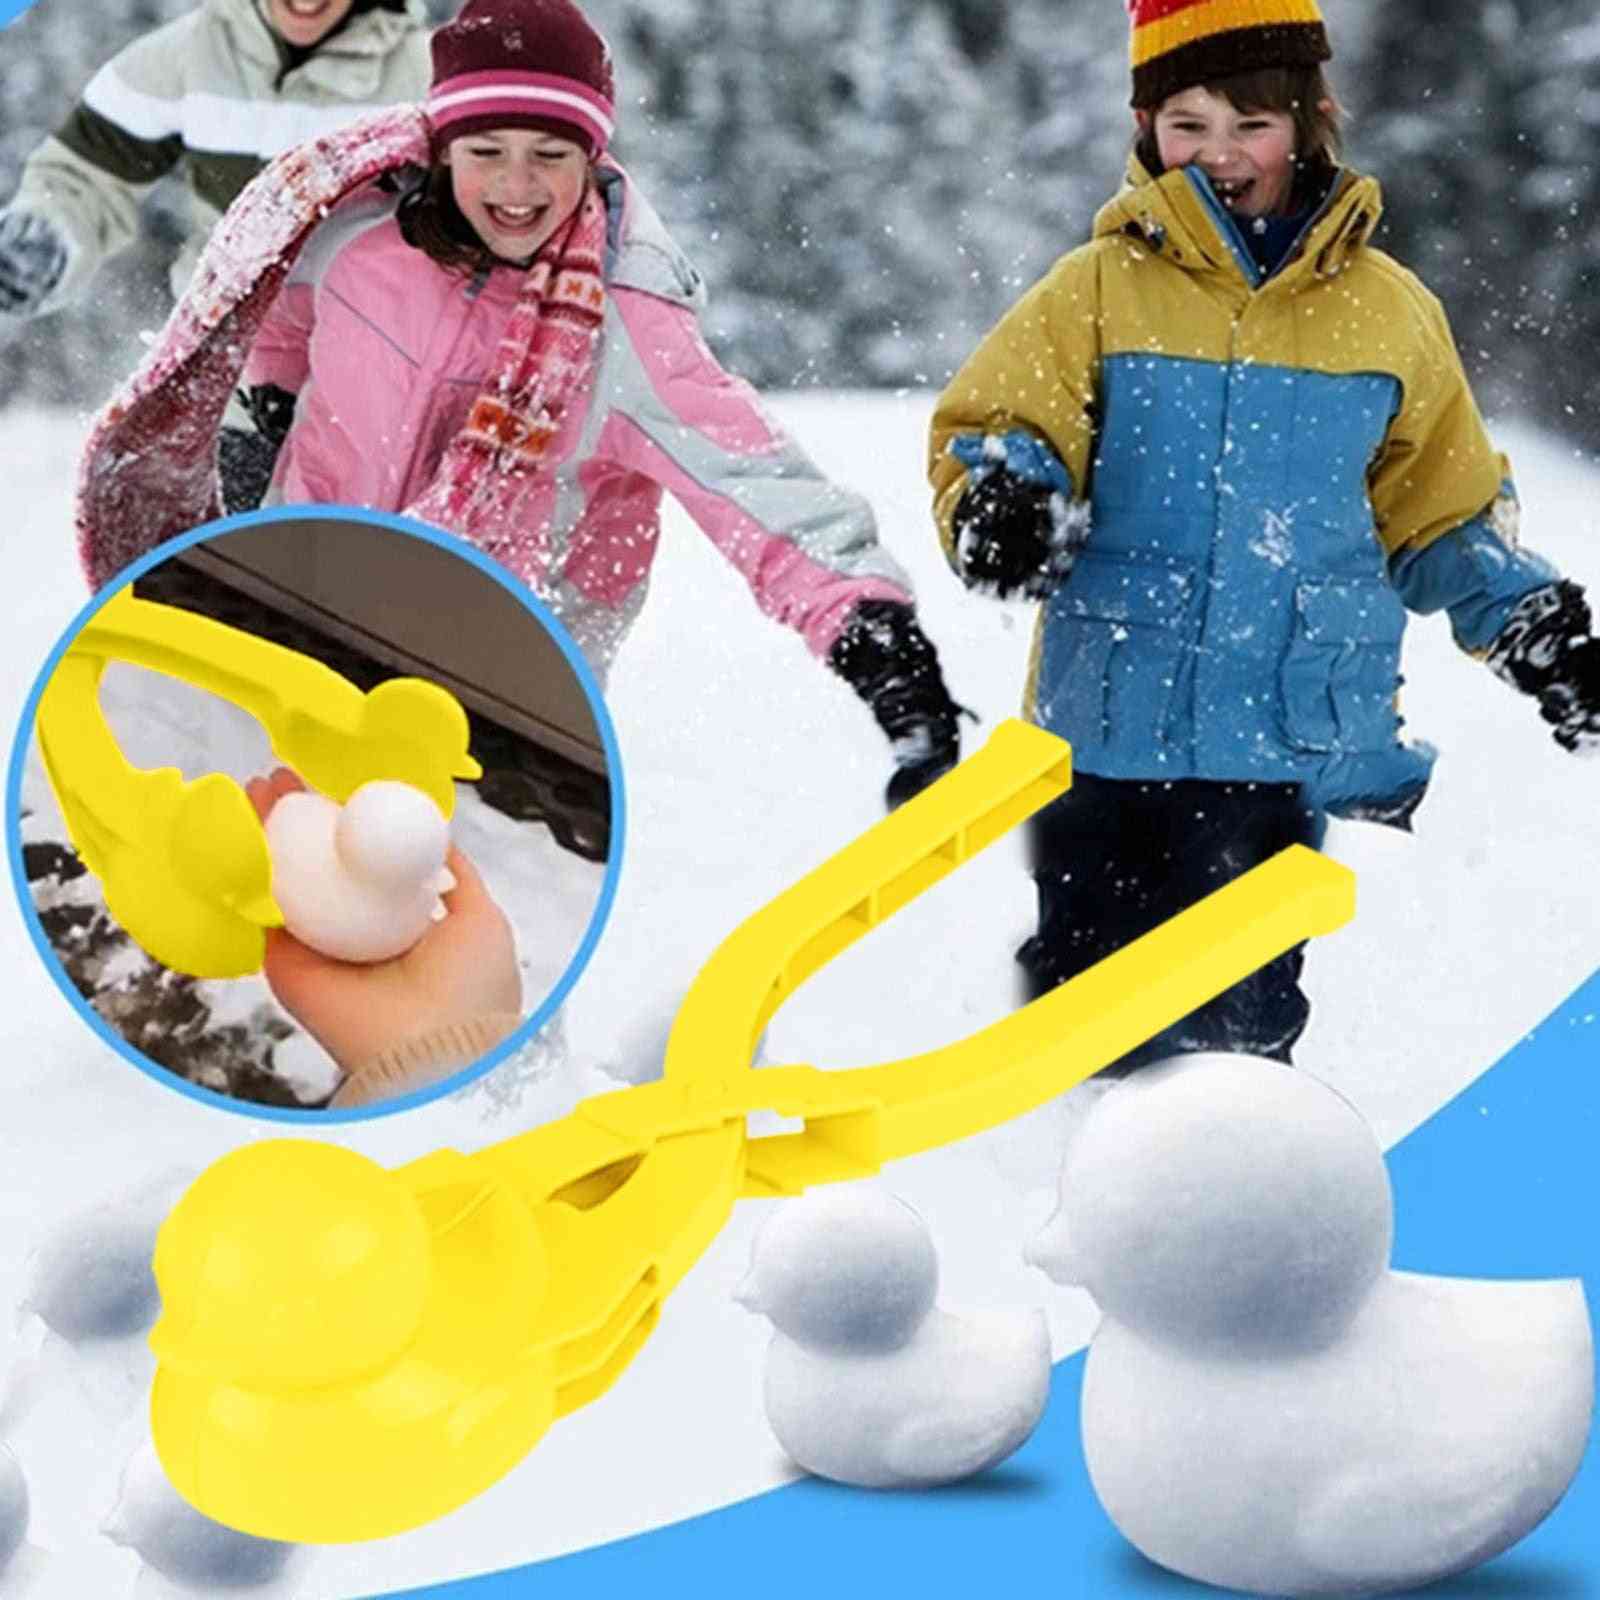 Toys For Children, Snowball Maker, Animal Shaped Snow Sand Mold Tool